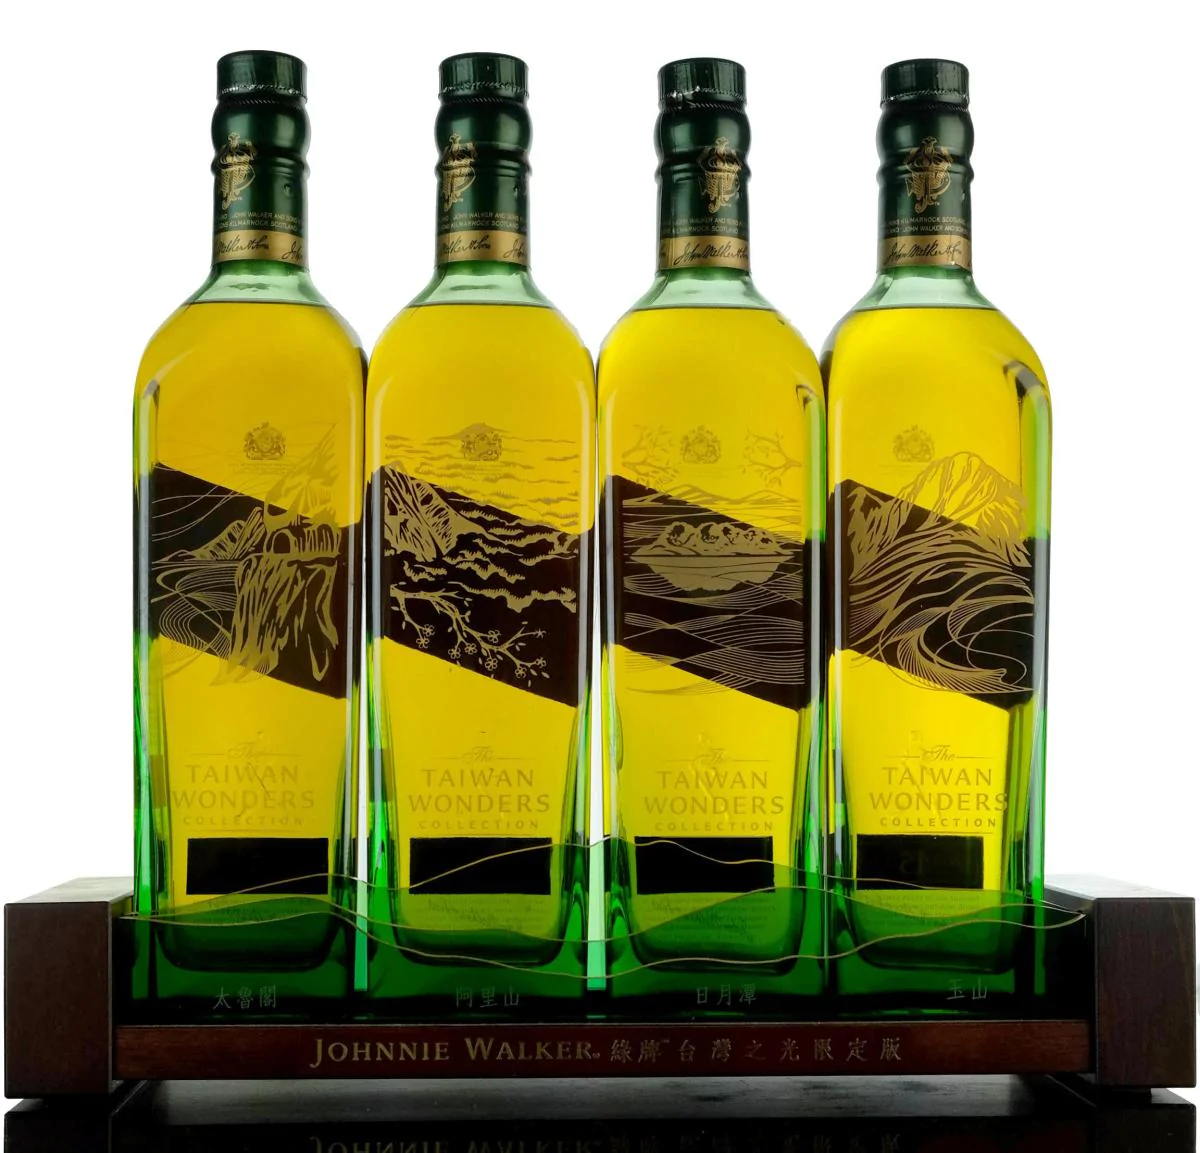 Johnnie Walker Green Label - Taiwan Wonders Collection With Base